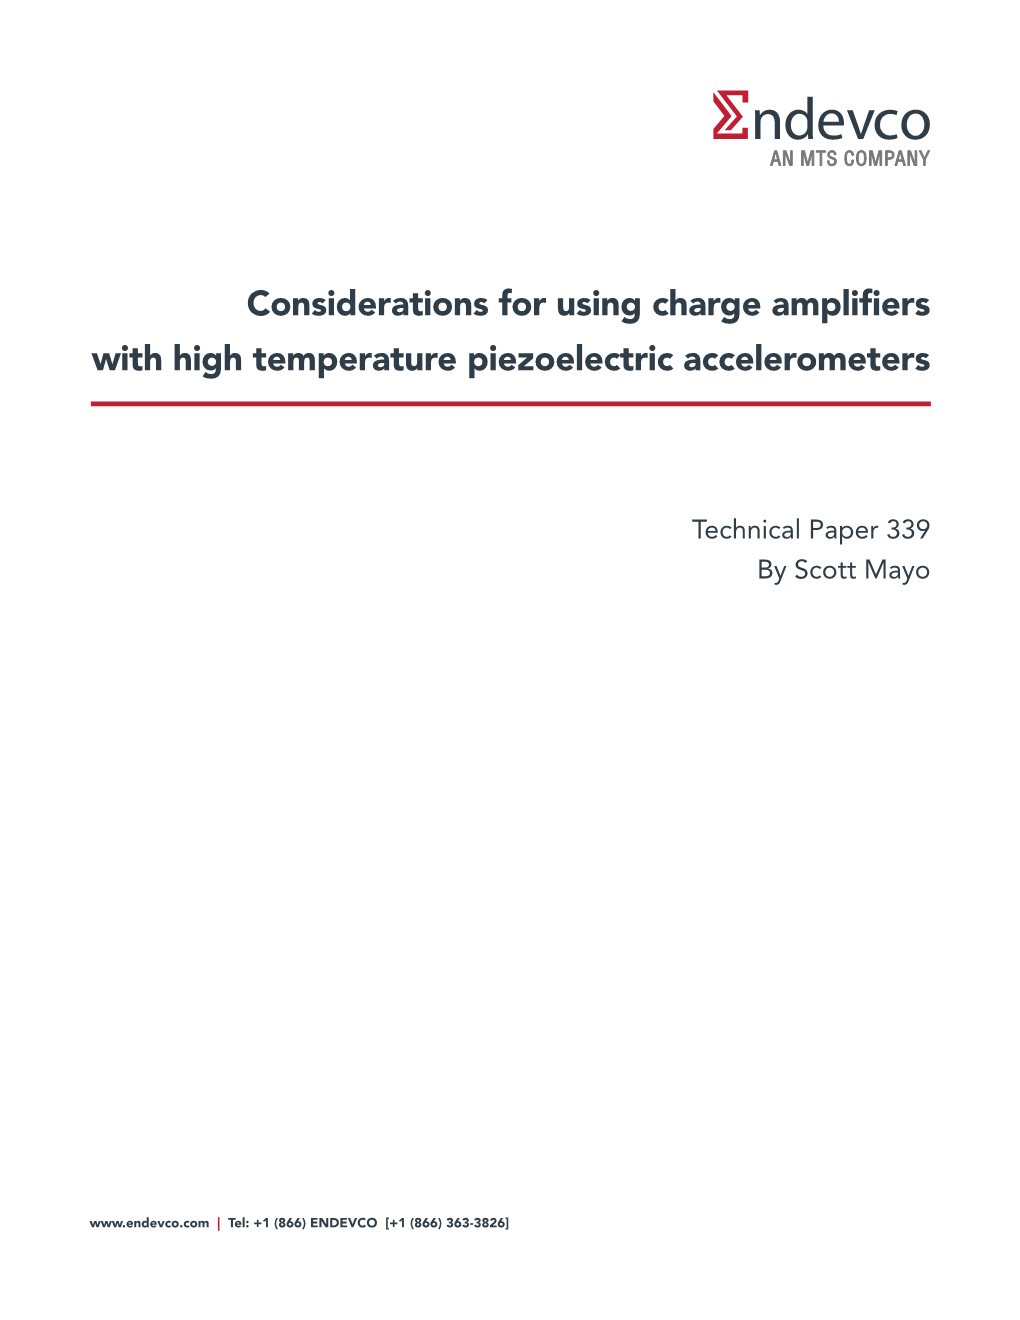 Considerations for Using Charge Amplifiers with High Temperature Piezoelectric Accelerometers